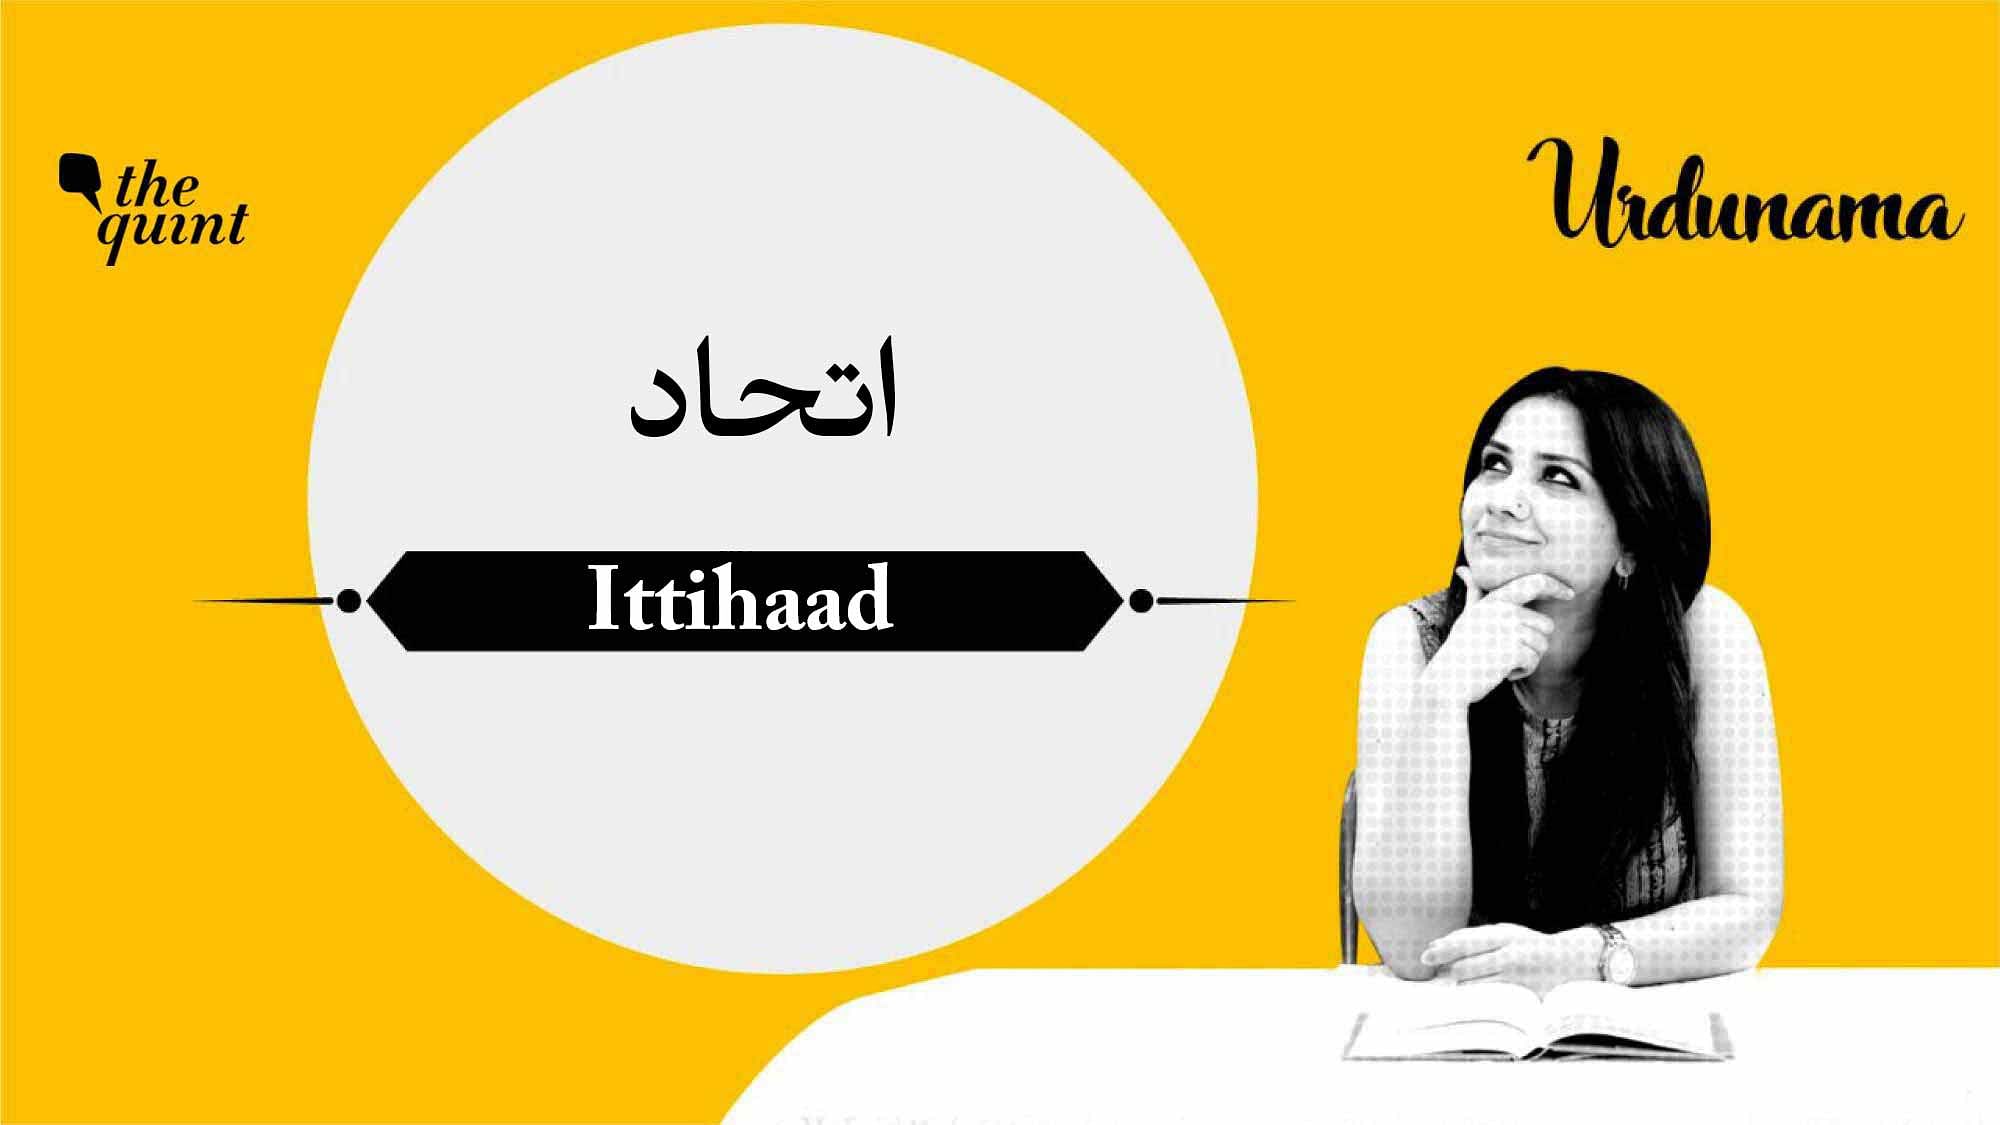 <div class="paragraphs"><p>Fabeha Syed talks about 'Ittihaad' in this episode of Urdunama</p></div>